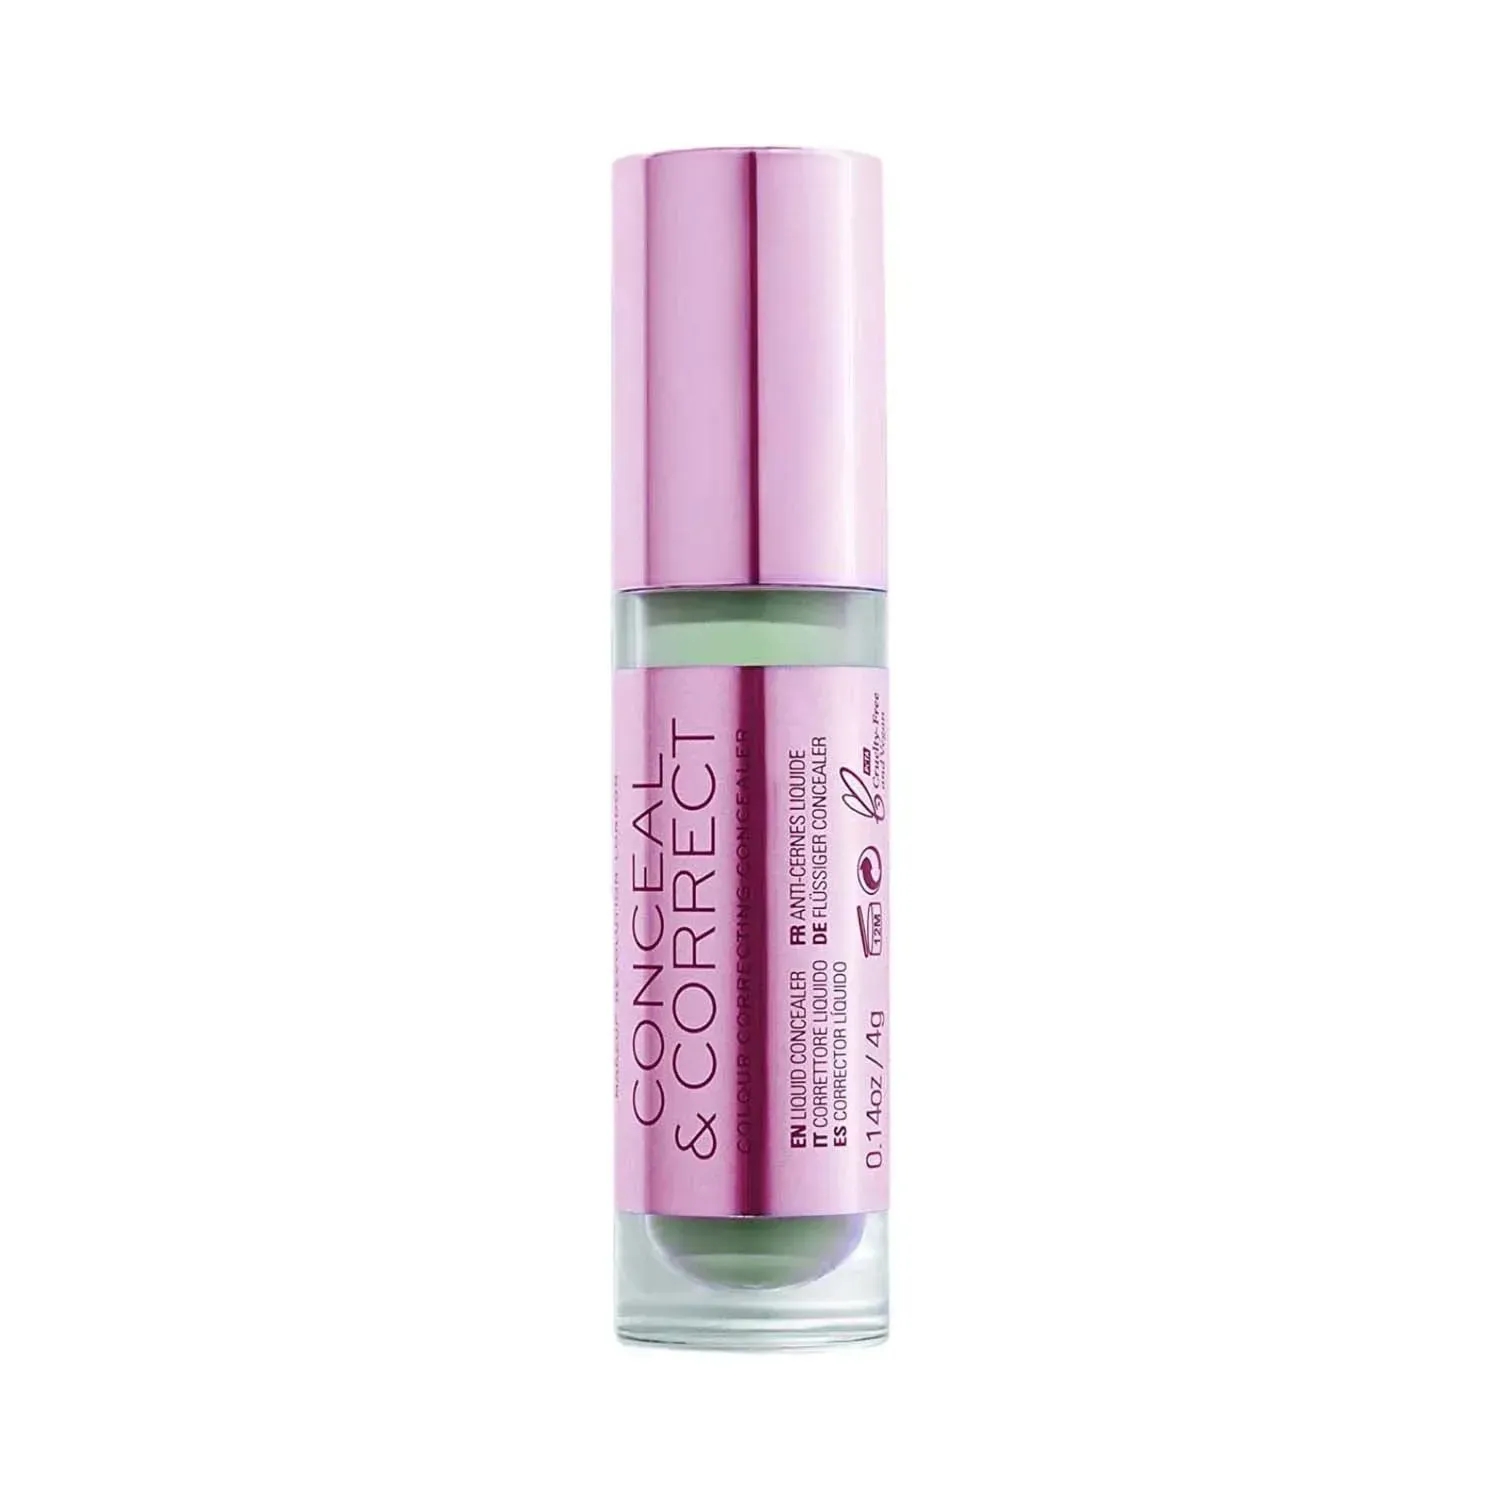 Makeup Revolution Conceal And Correct - Green (4g)